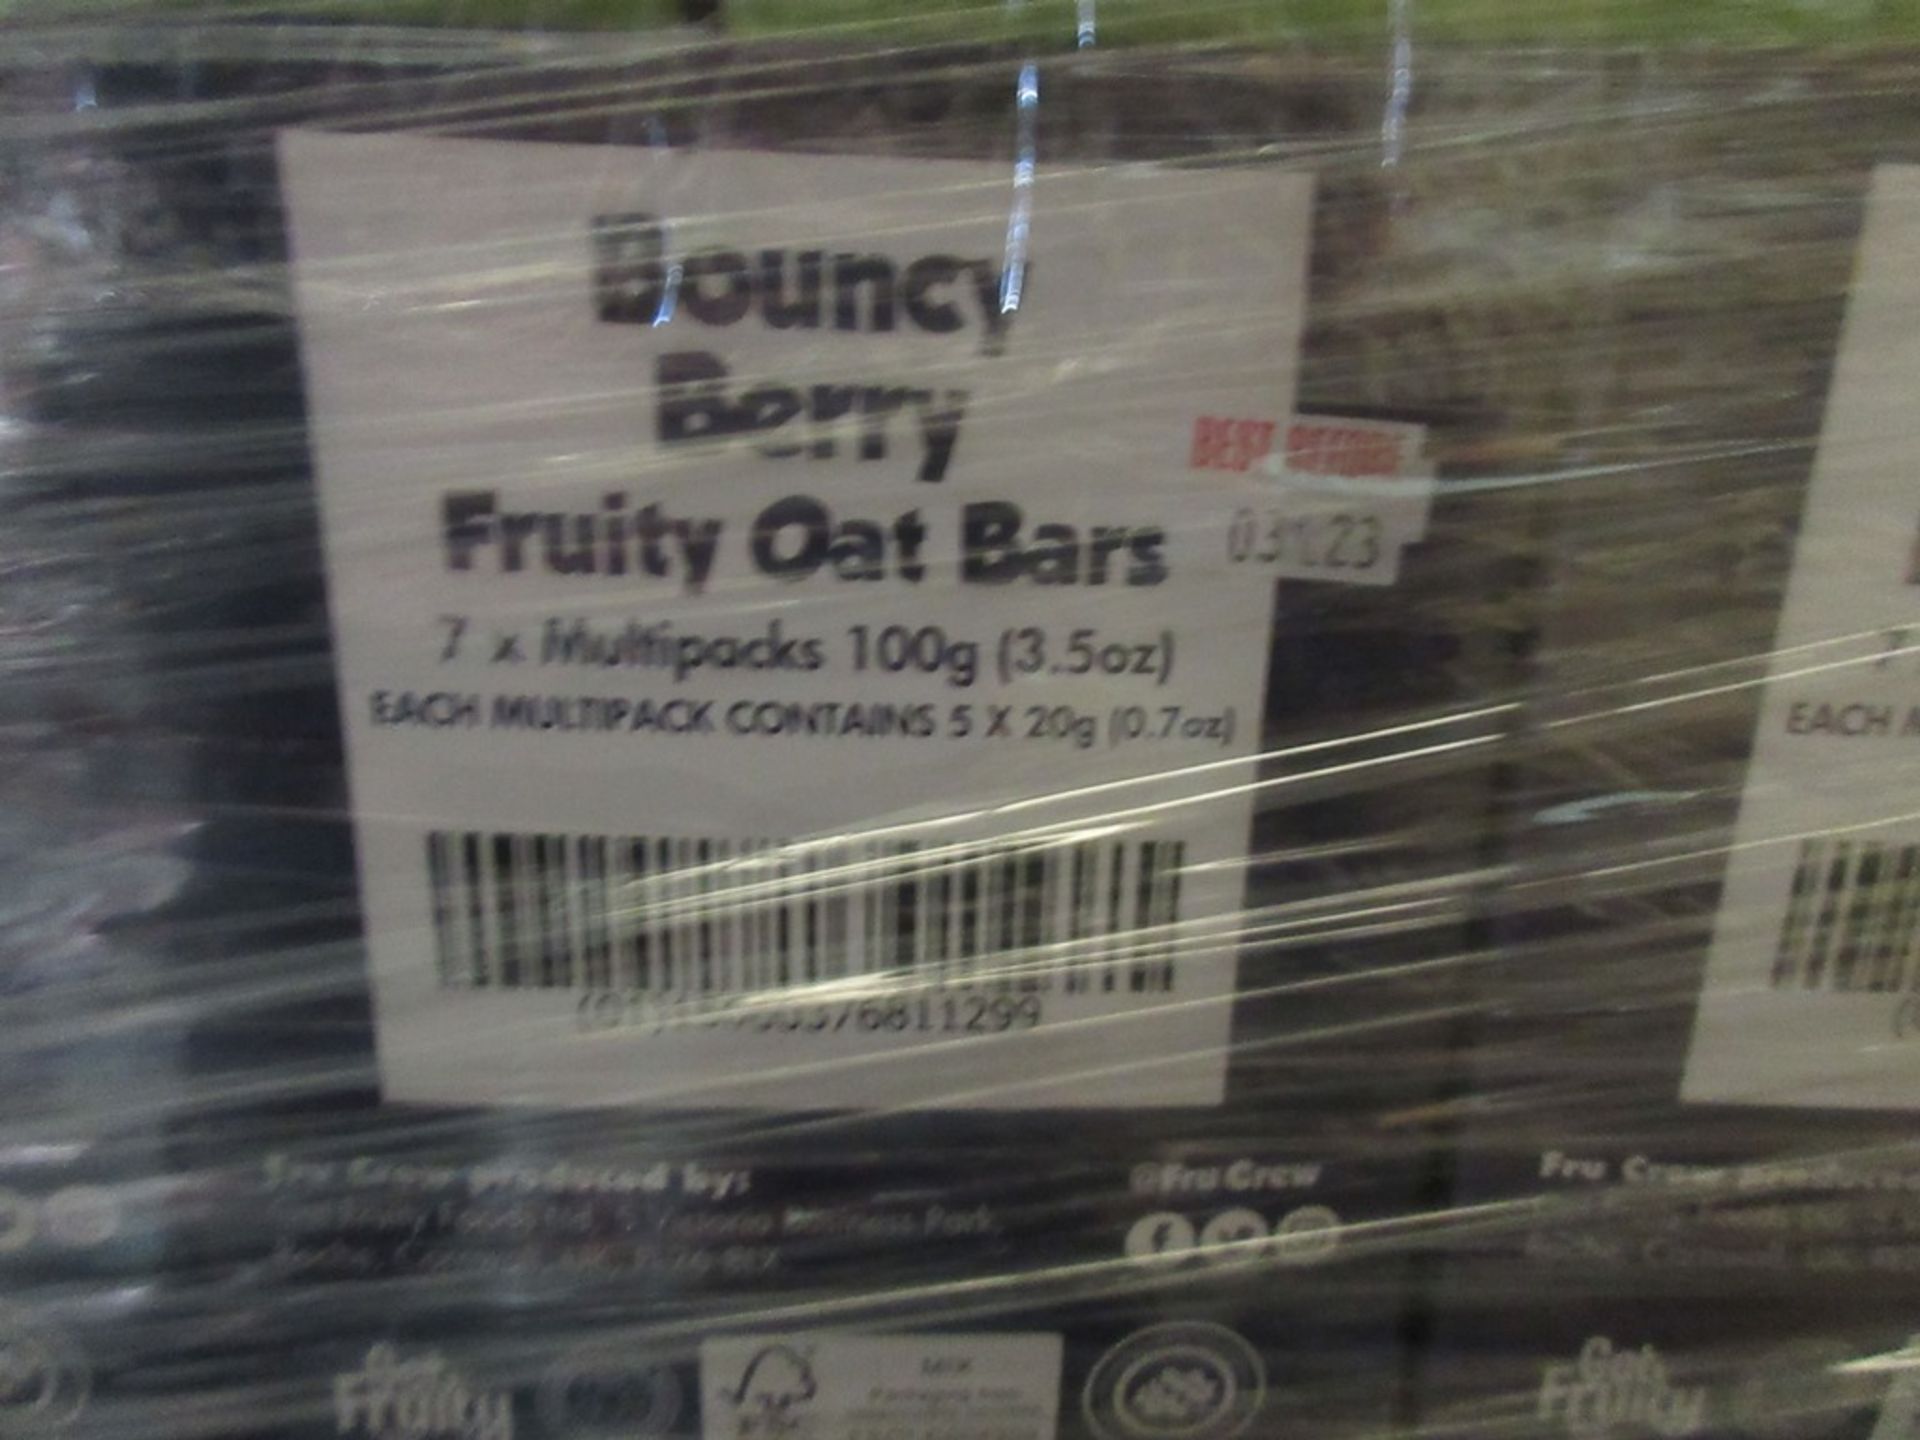 Pallet of 301 boxes x 35 x 20g Fru Crew Bouncy Berry fruit oat bars - expiry July 2023 - Image 2 of 3